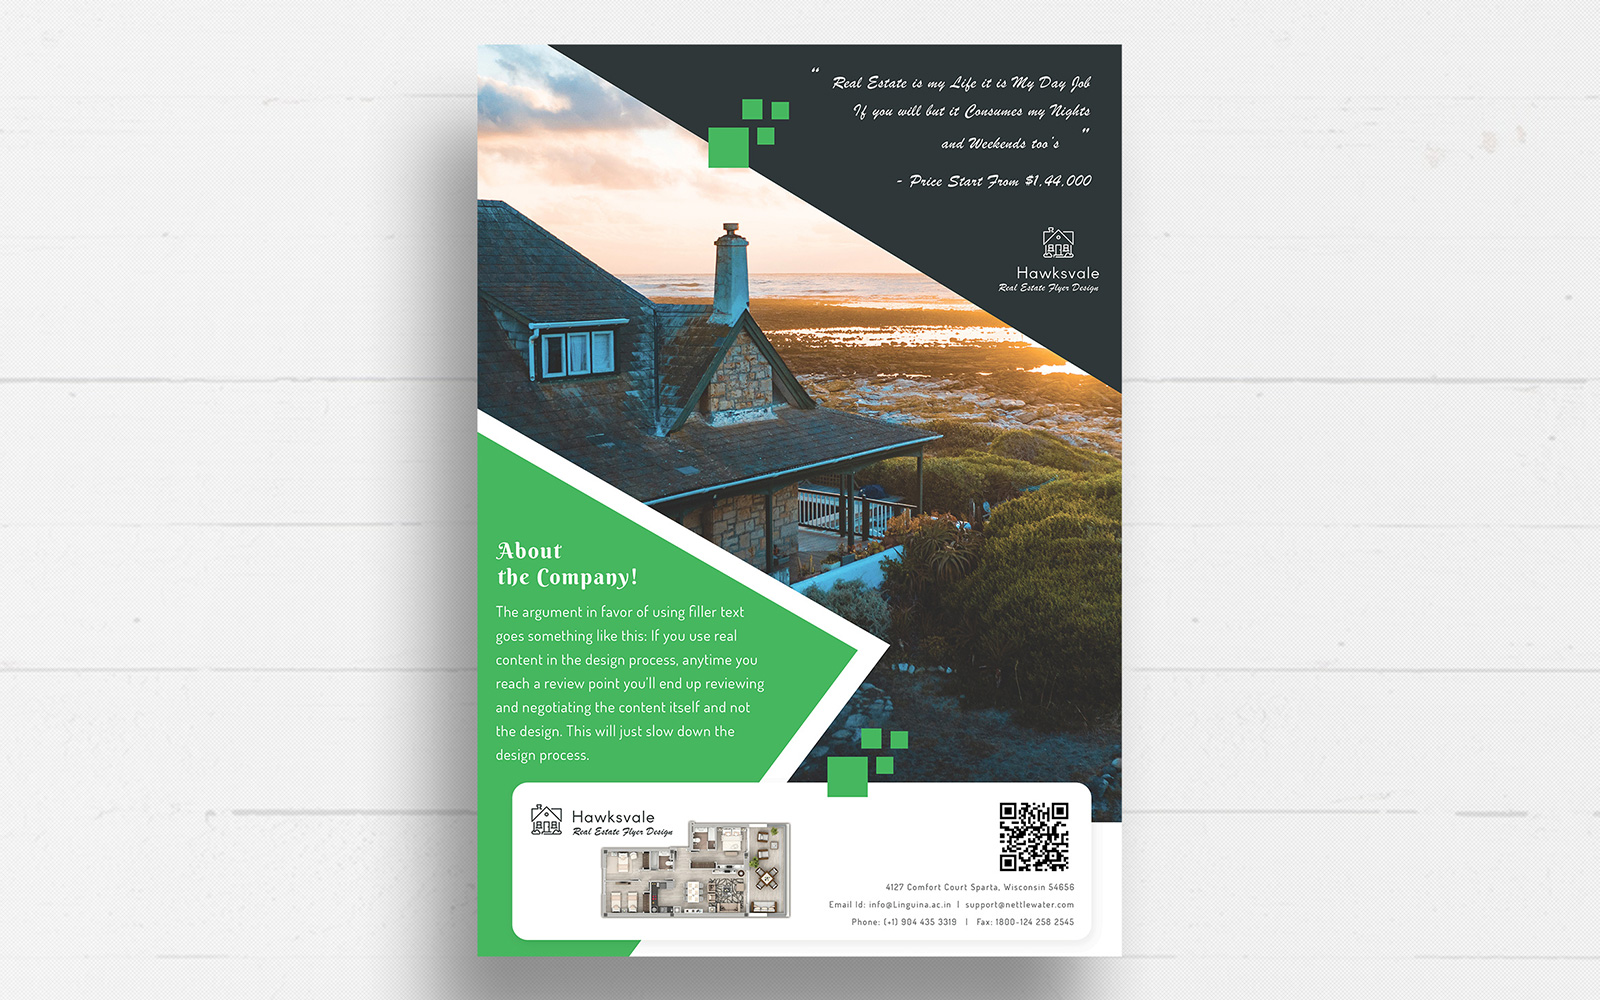 Smeap - Real Estate Property Flyer Design - Corporate Identity Template